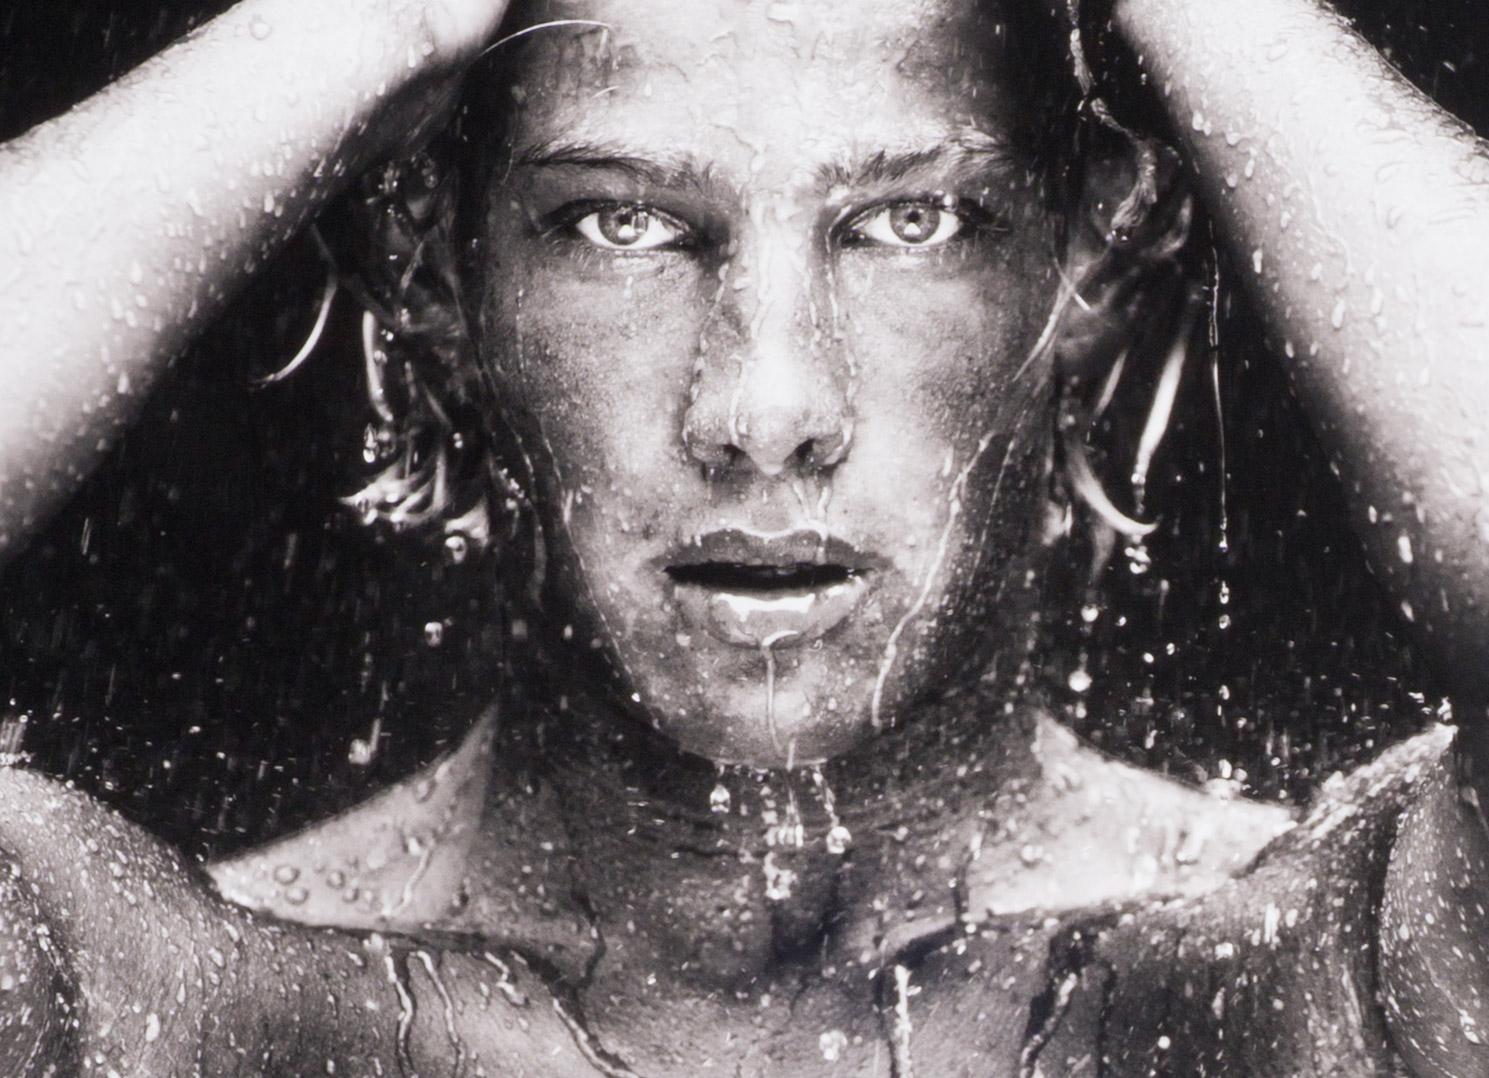 WET, Portrait (young nude Dutch boy is dripping wet and looking directly out) - Photograph by Benno Thoma